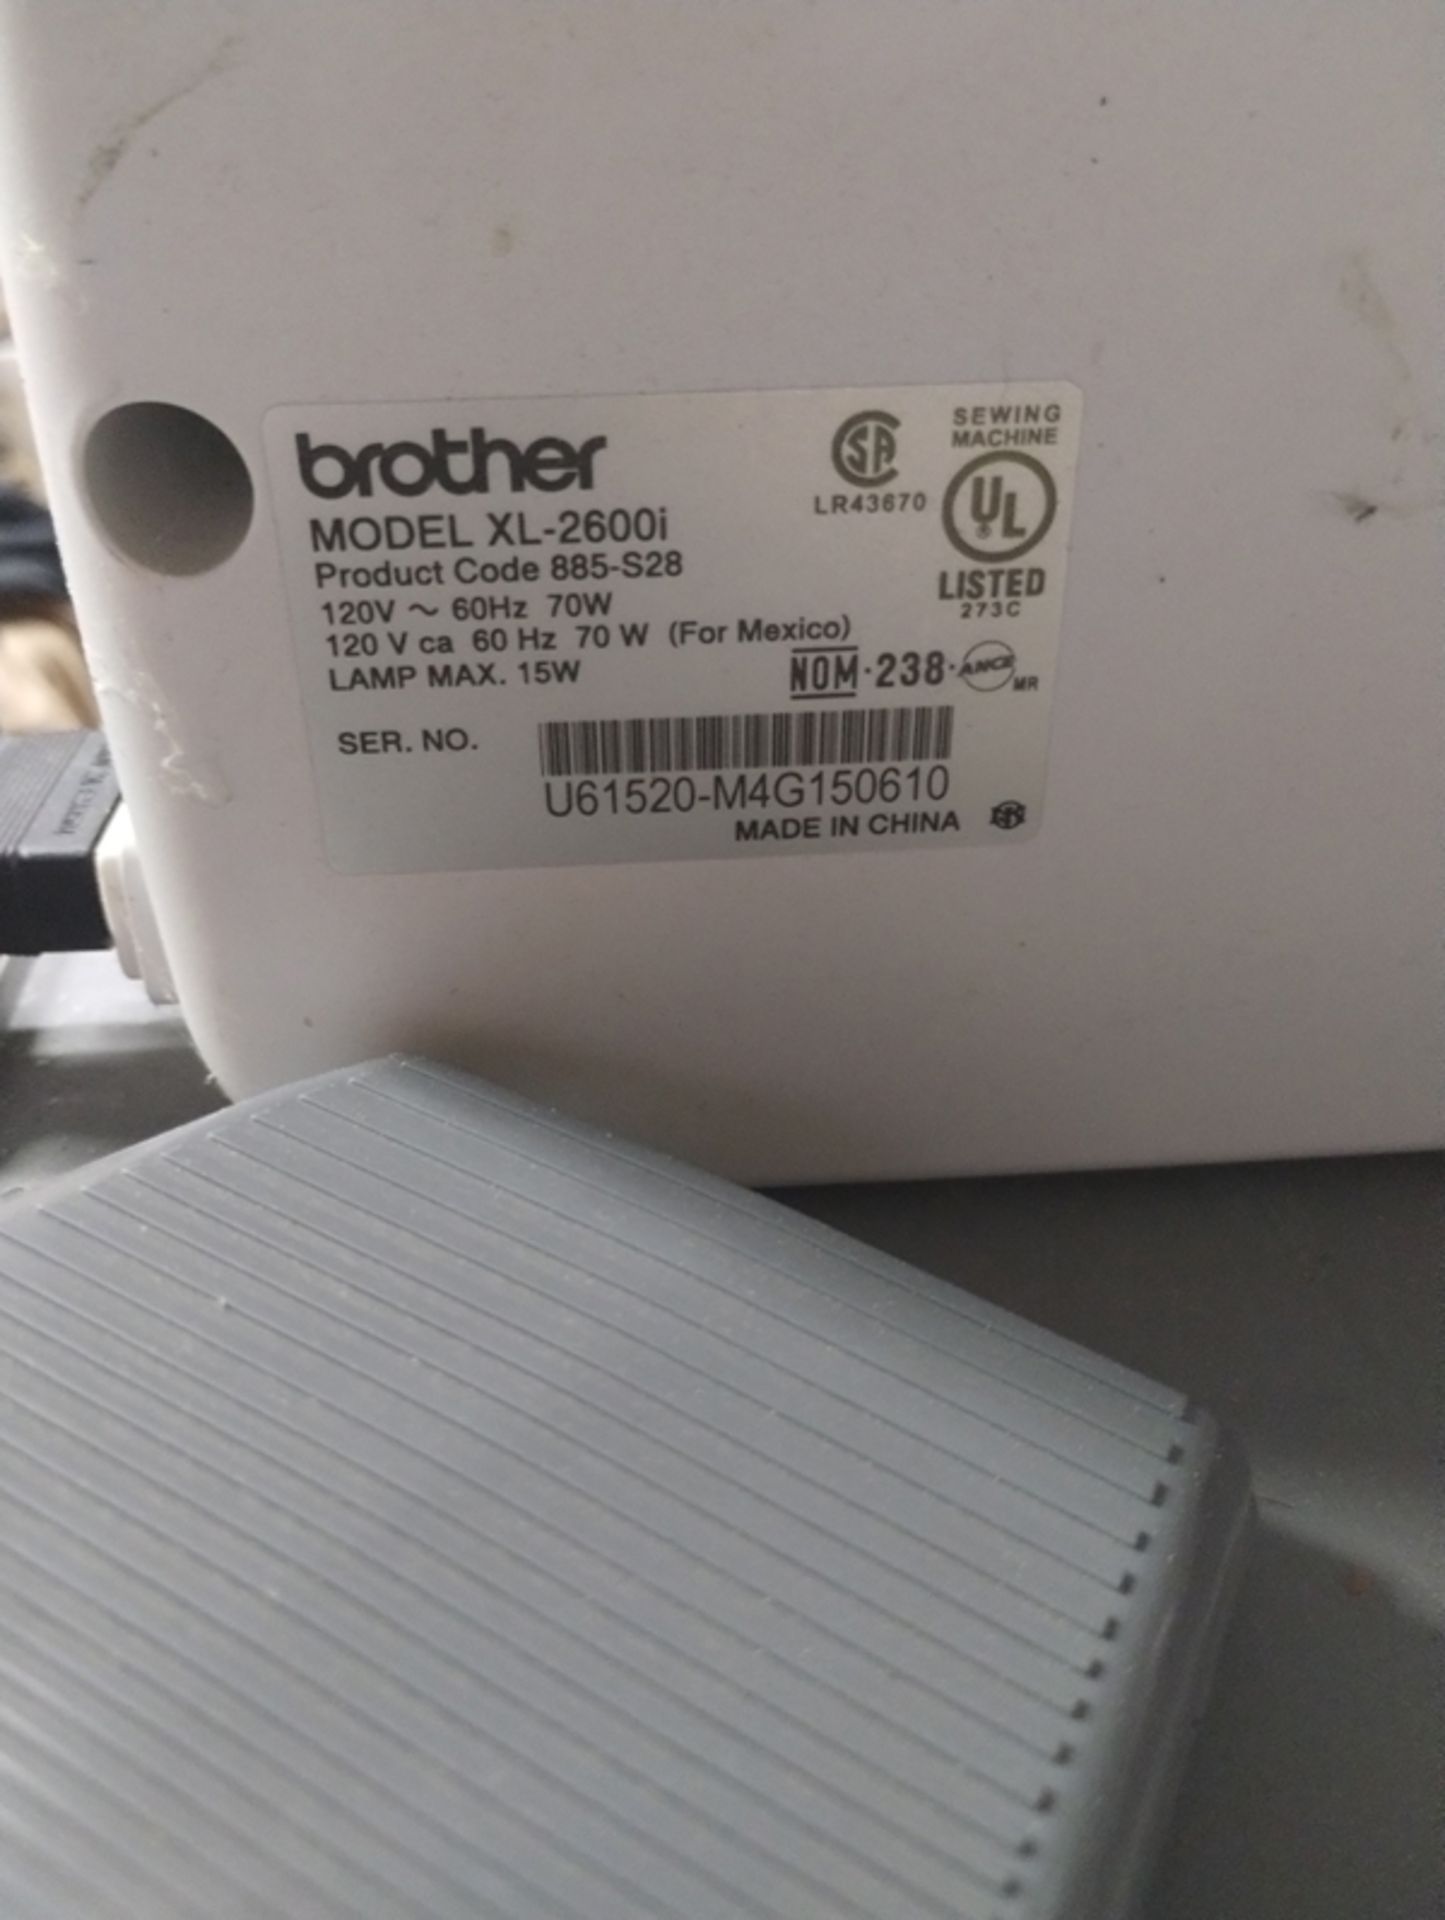 BROTHER XL-2600I SEWING MACHINE - Image 6 of 6